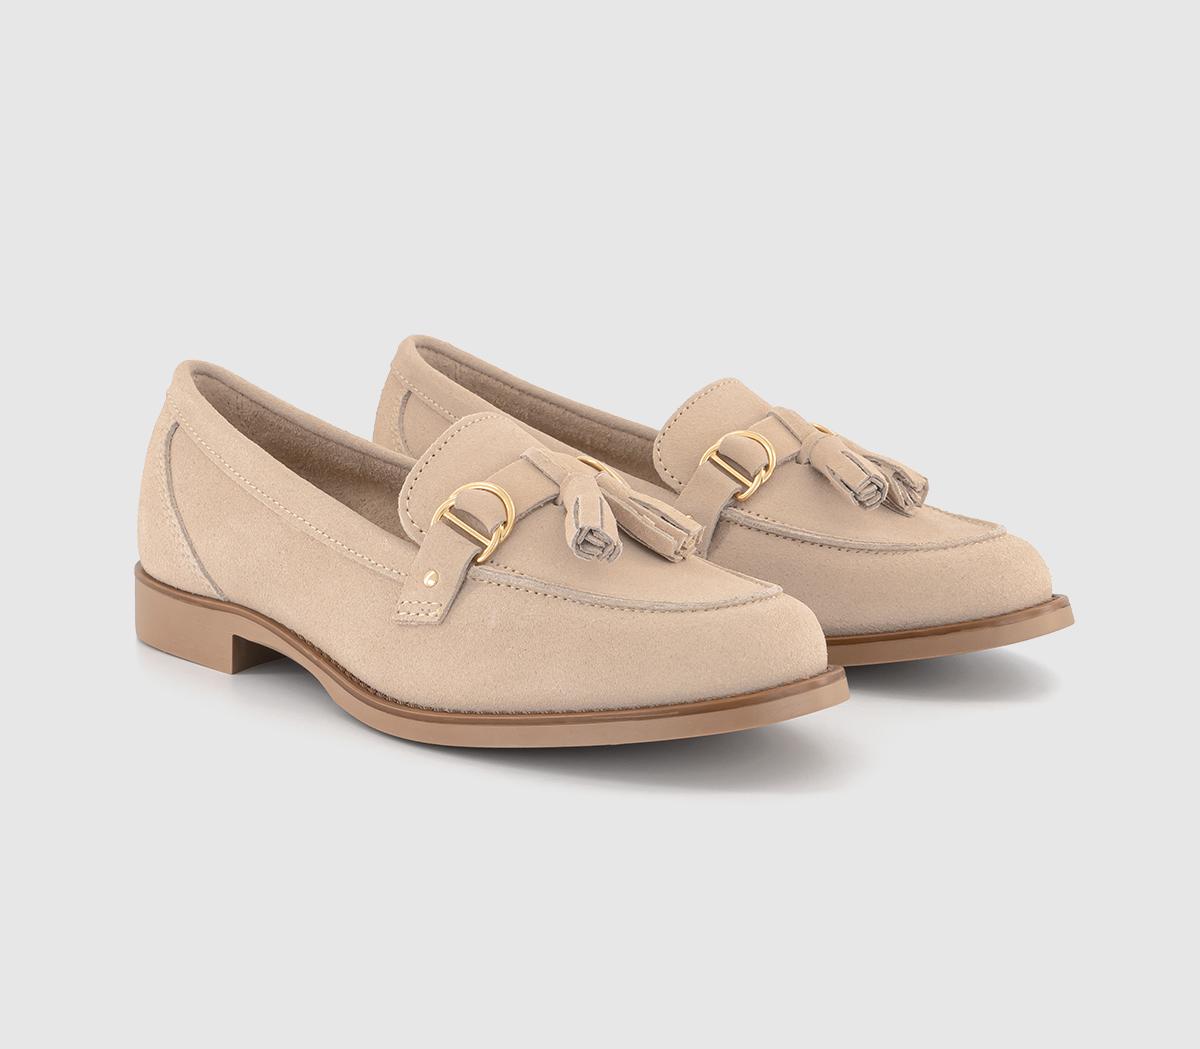 OFFICE Womens Feels Leather Trim Tassel Loafers Blush Suede Natural, 3